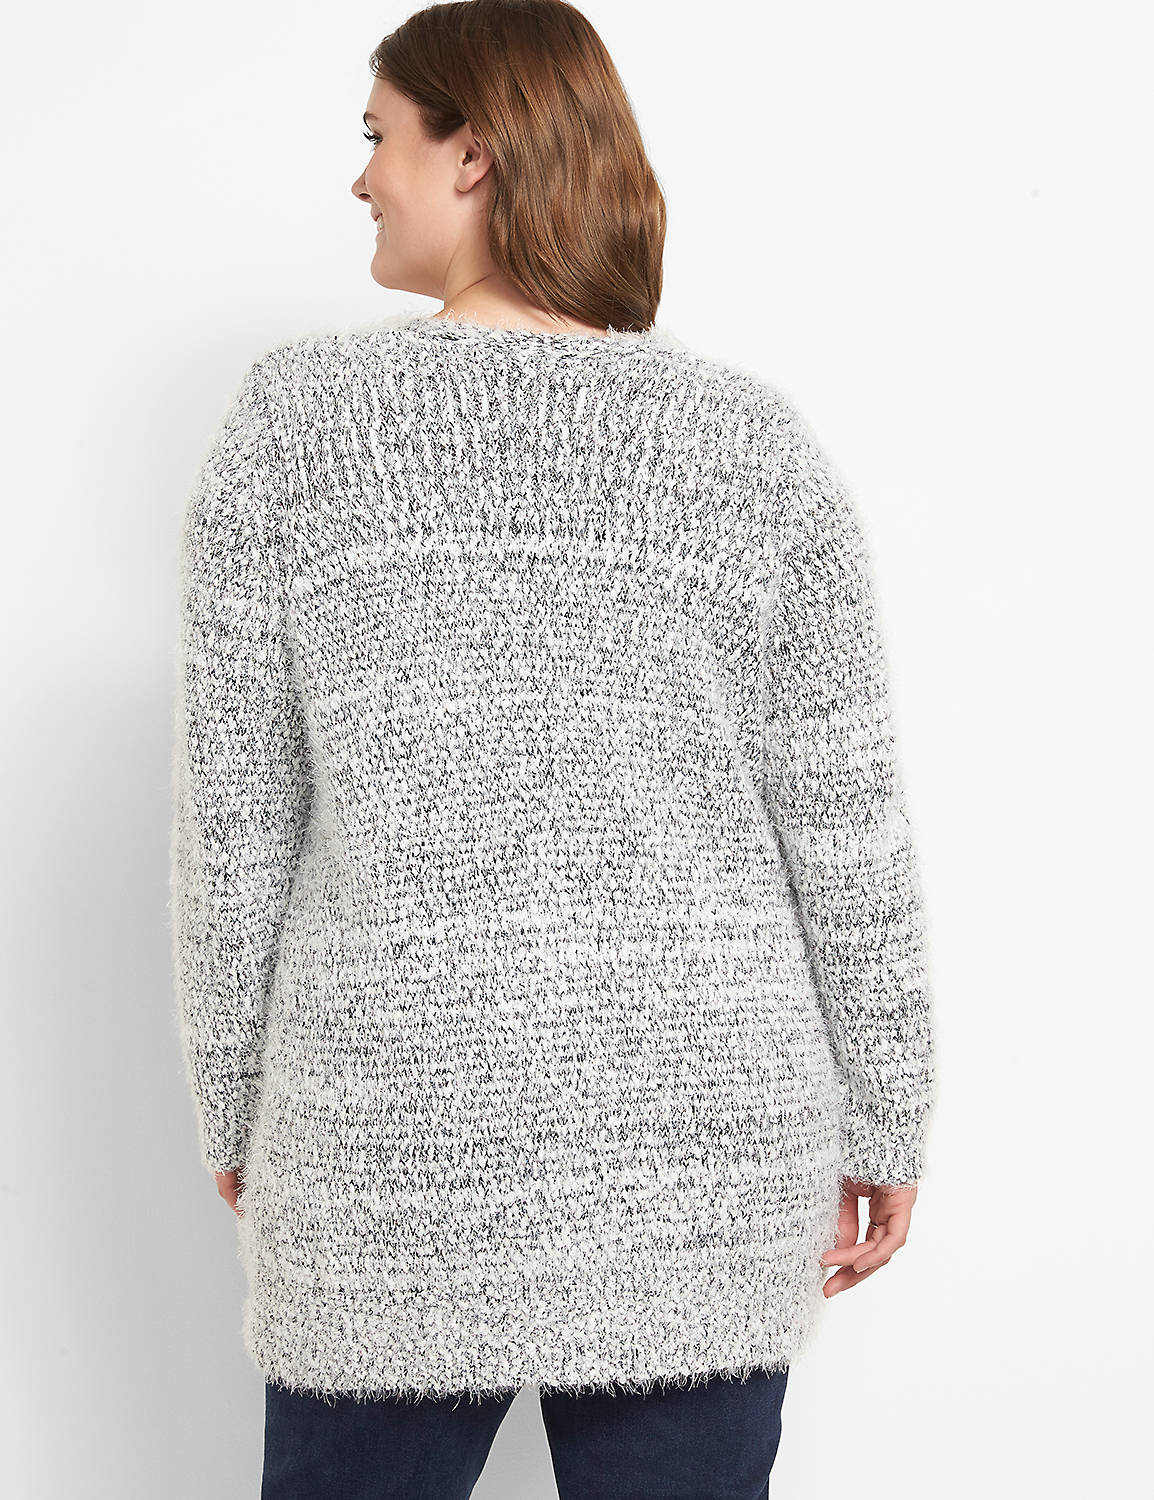 Open-Front Marled Cardigan Product Image 2